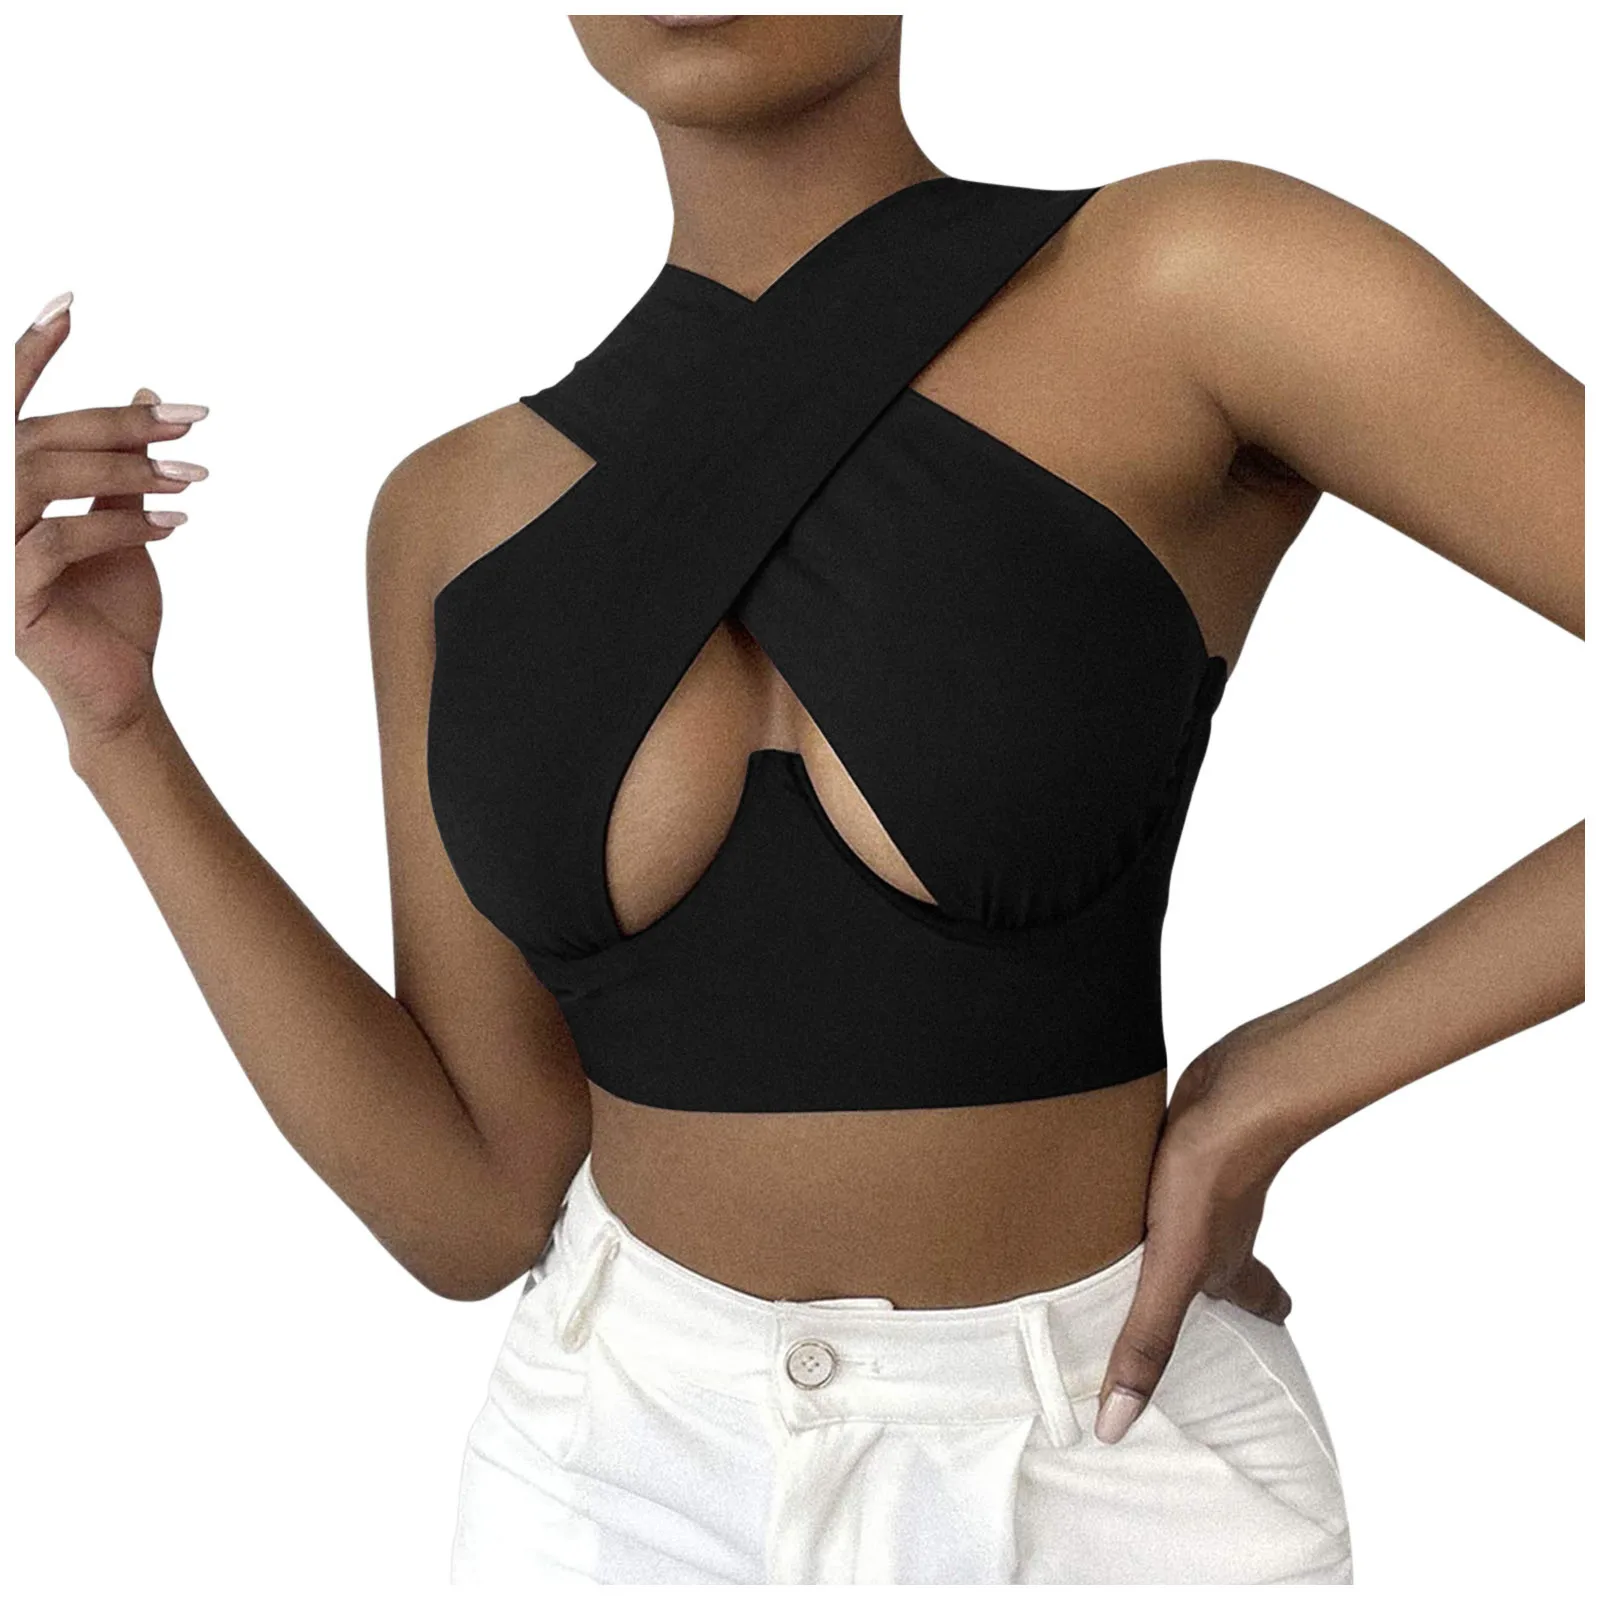 MISYAA Perspective Crop Tops for Women Short Sleeve Hollowed Fishnet Tee Short Shirt Tank Top Party Camis Tops